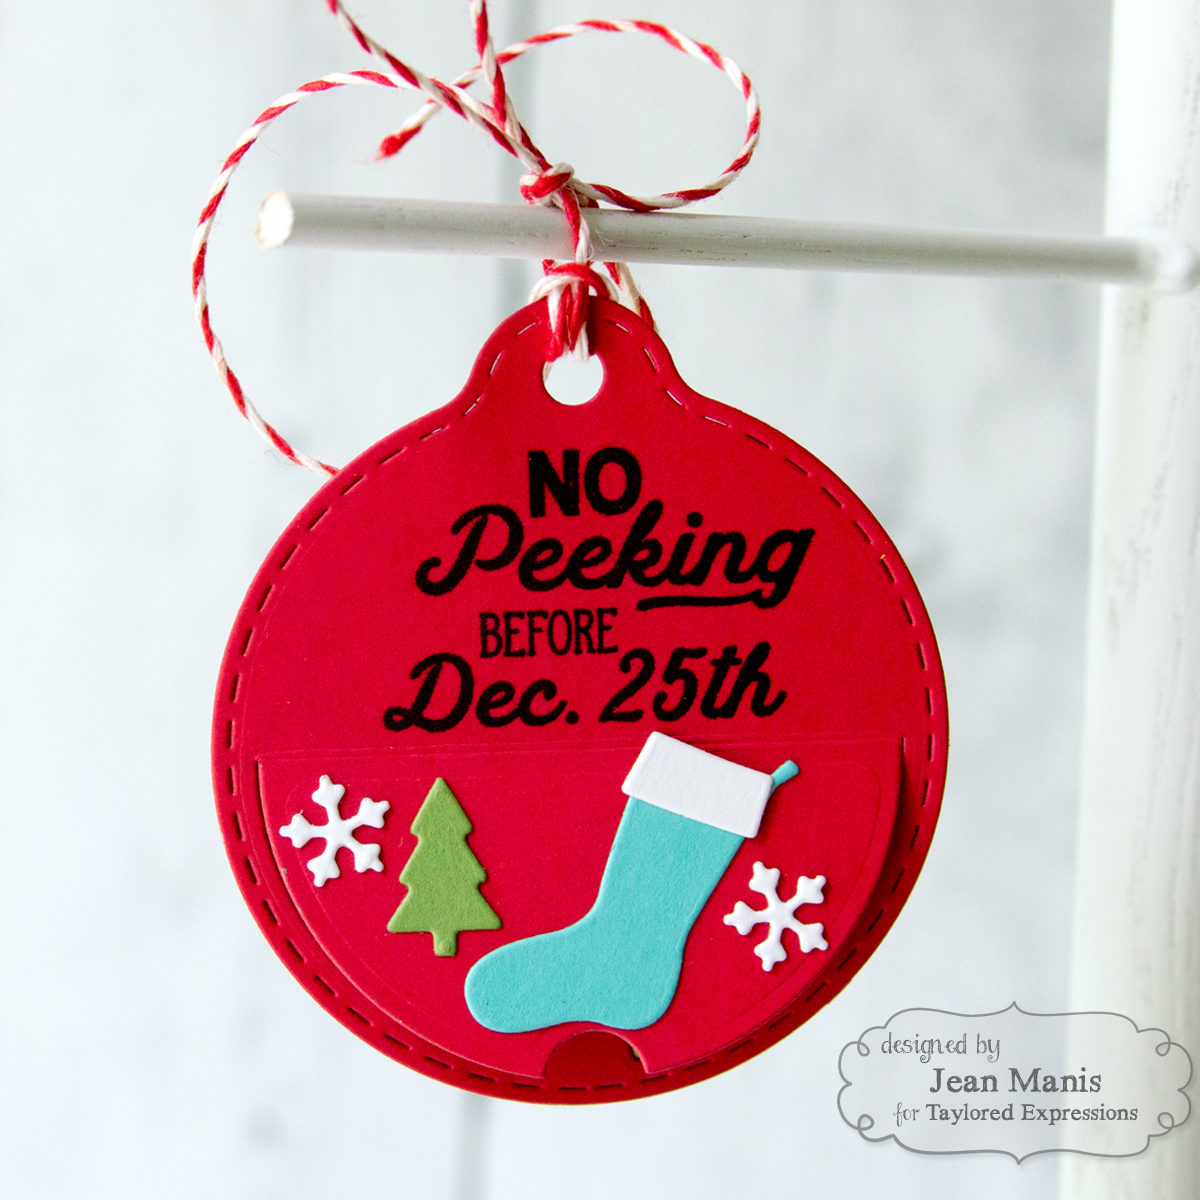 From the North Pole – Taylored Expressions Tags